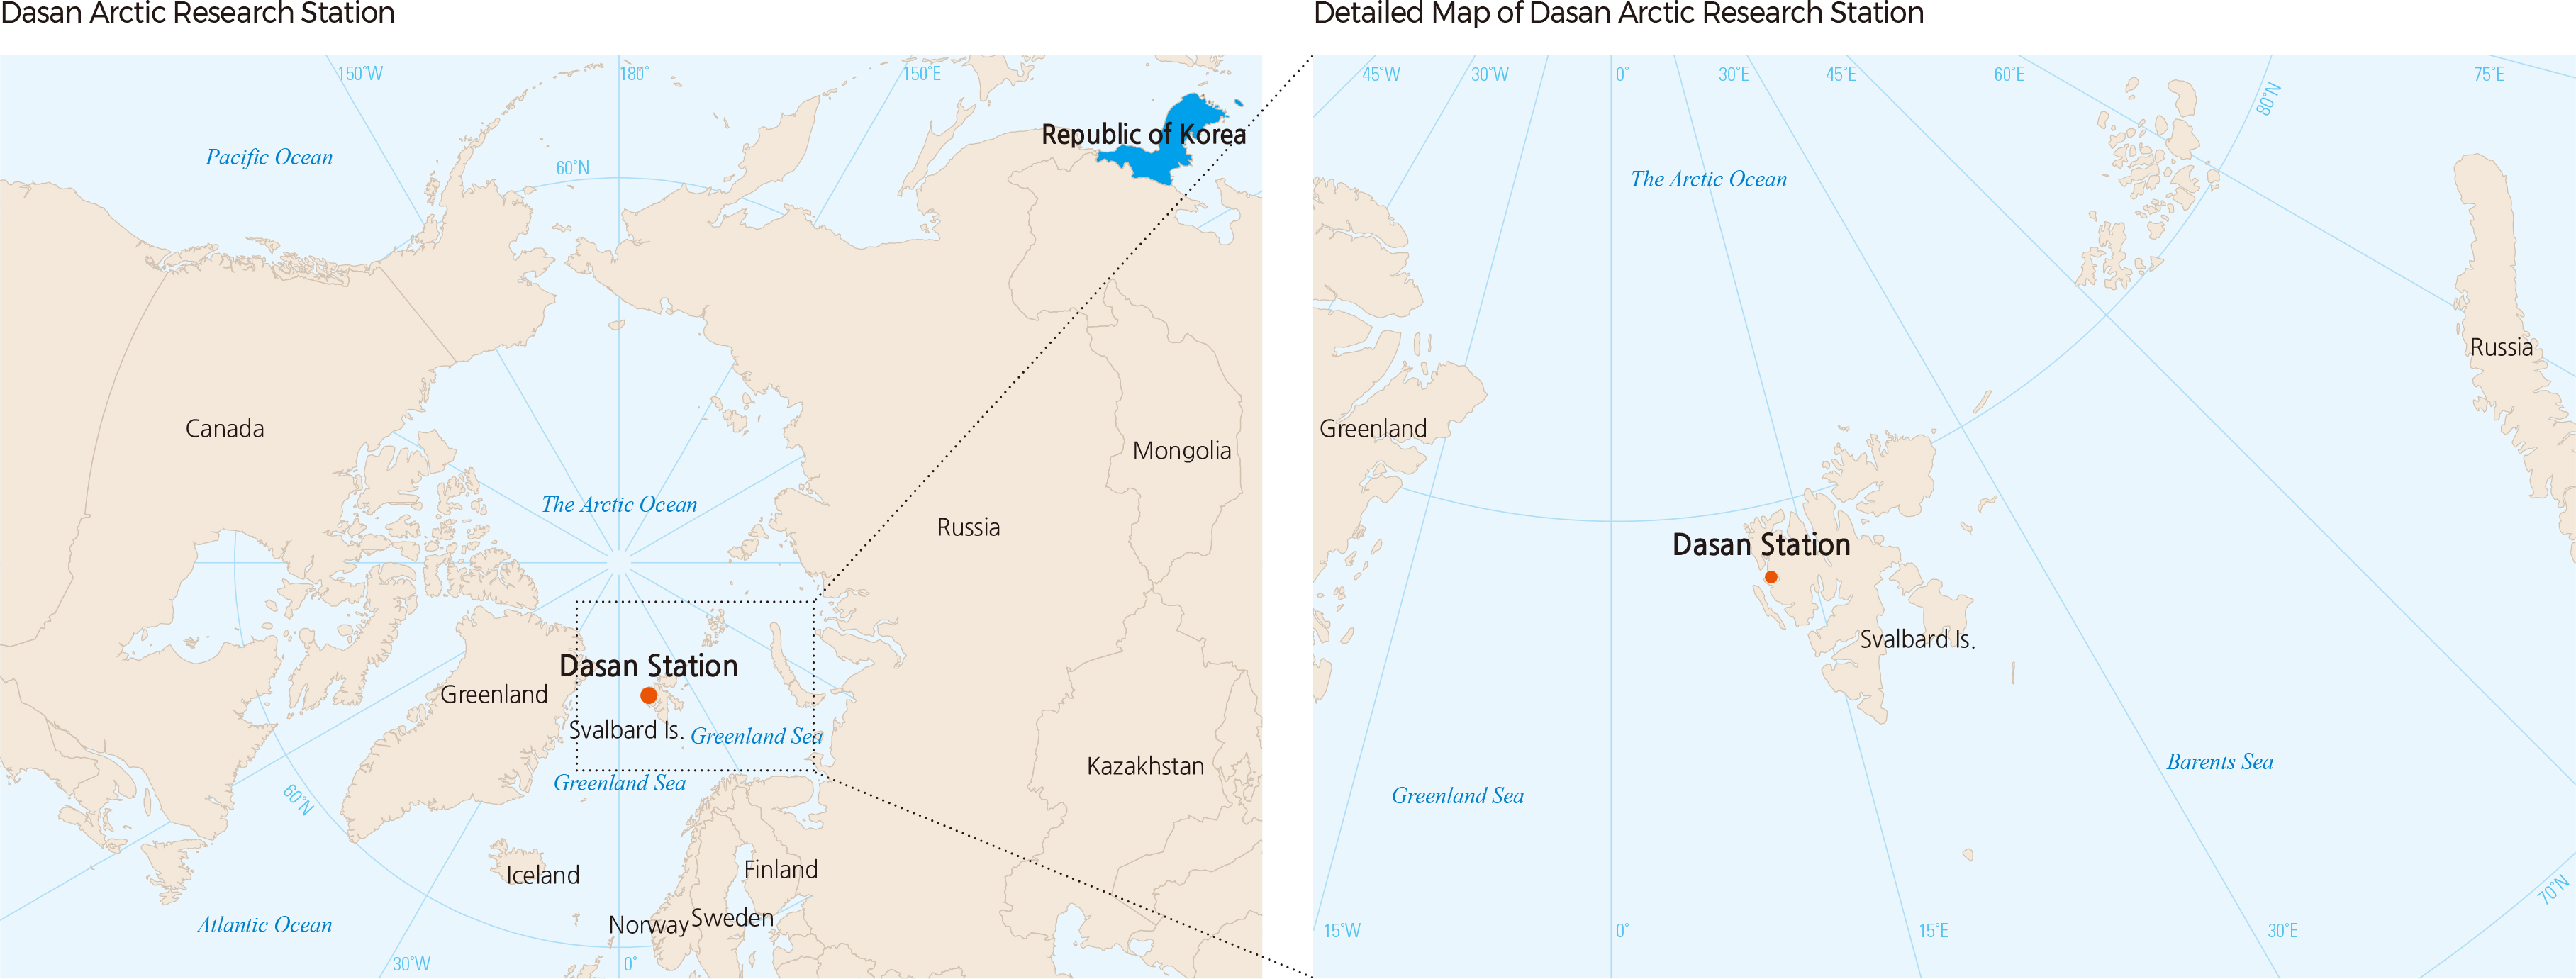 Dasan Arctic Research Station / Detailed Map of Dasan Arctic Research Station